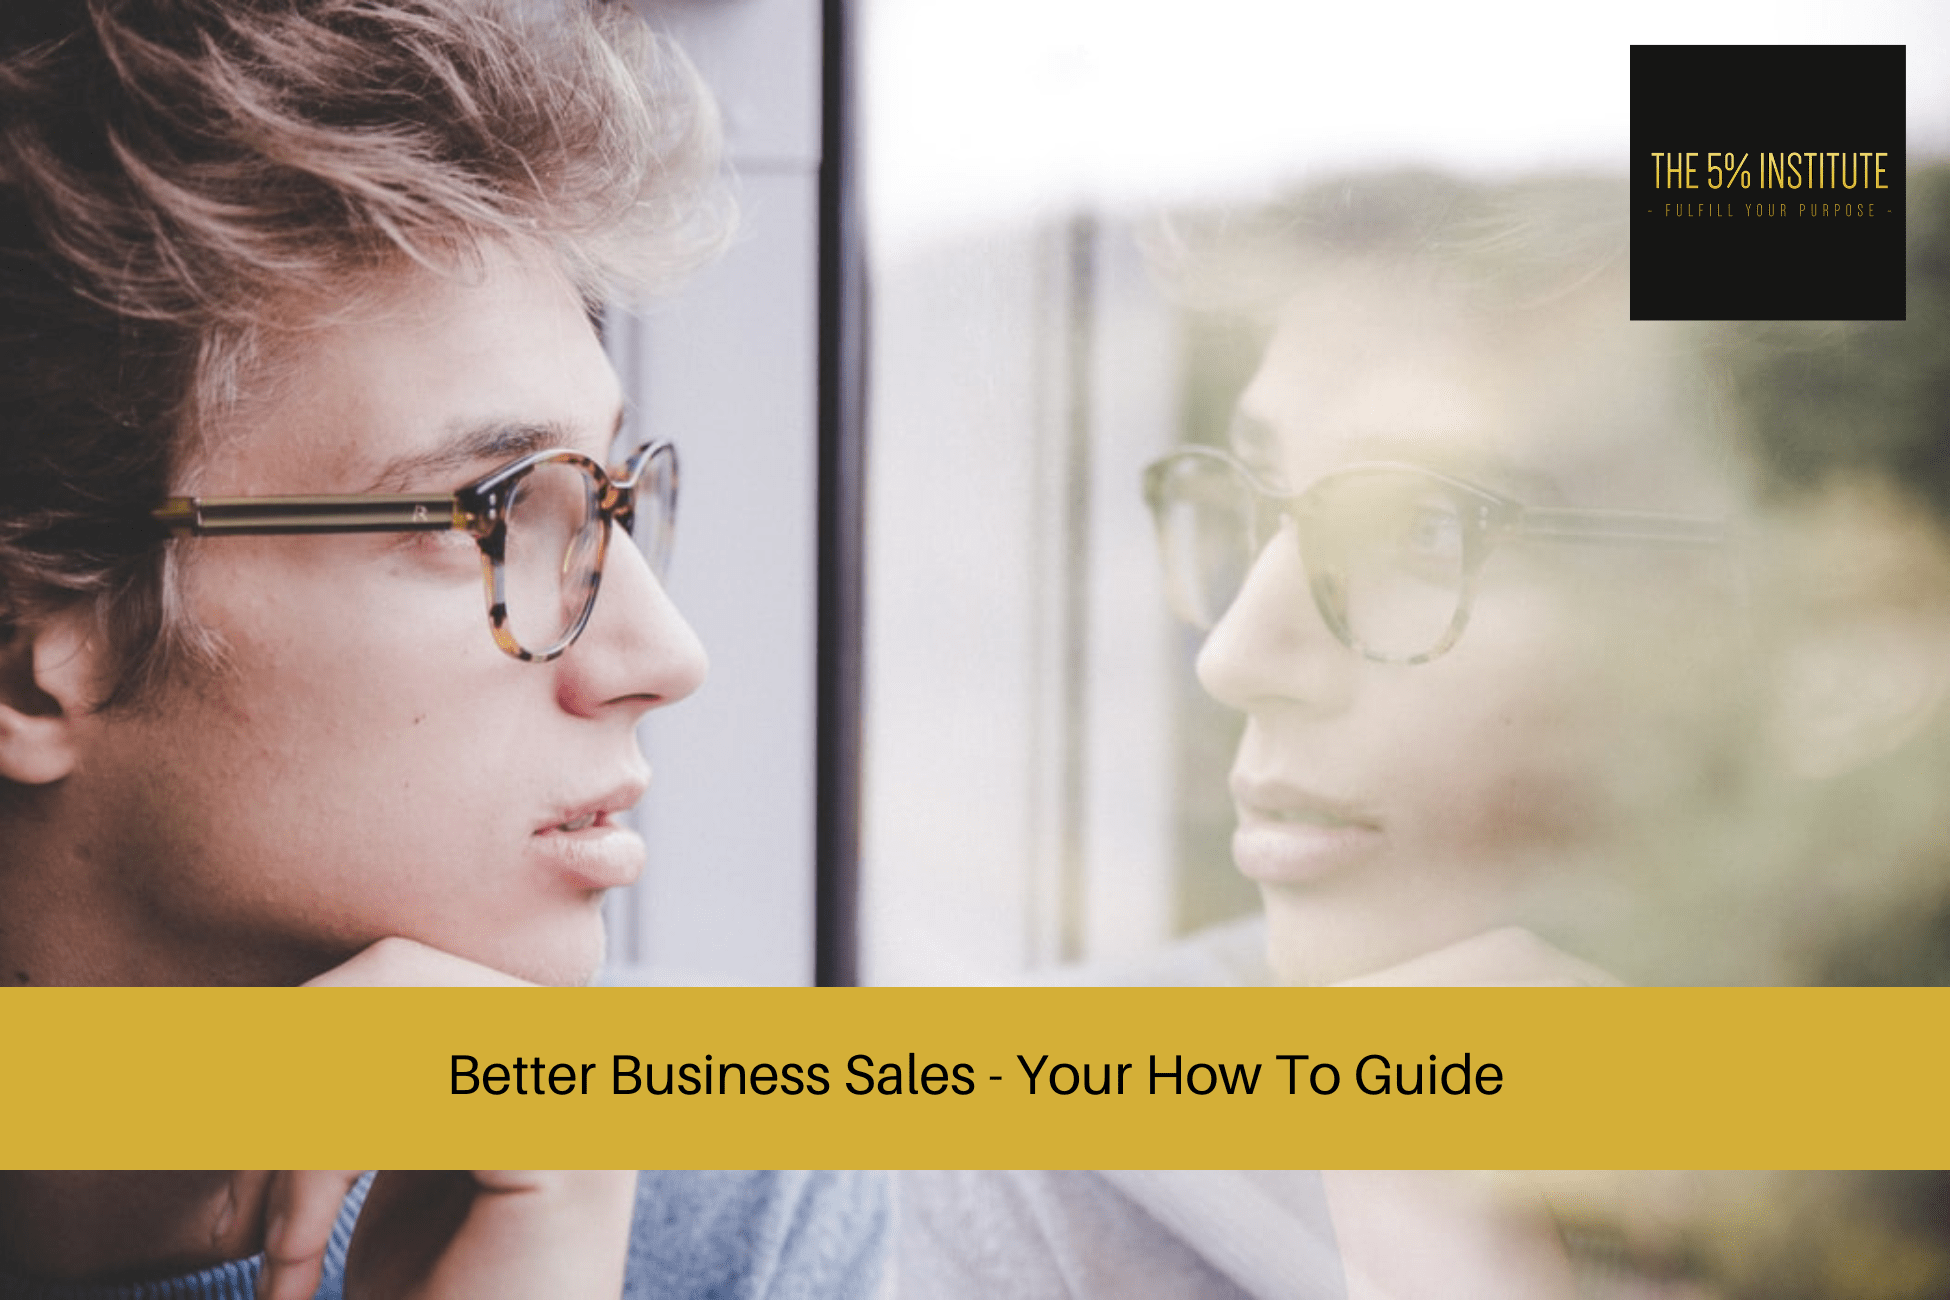 Better Business Sales - Your How To Guide